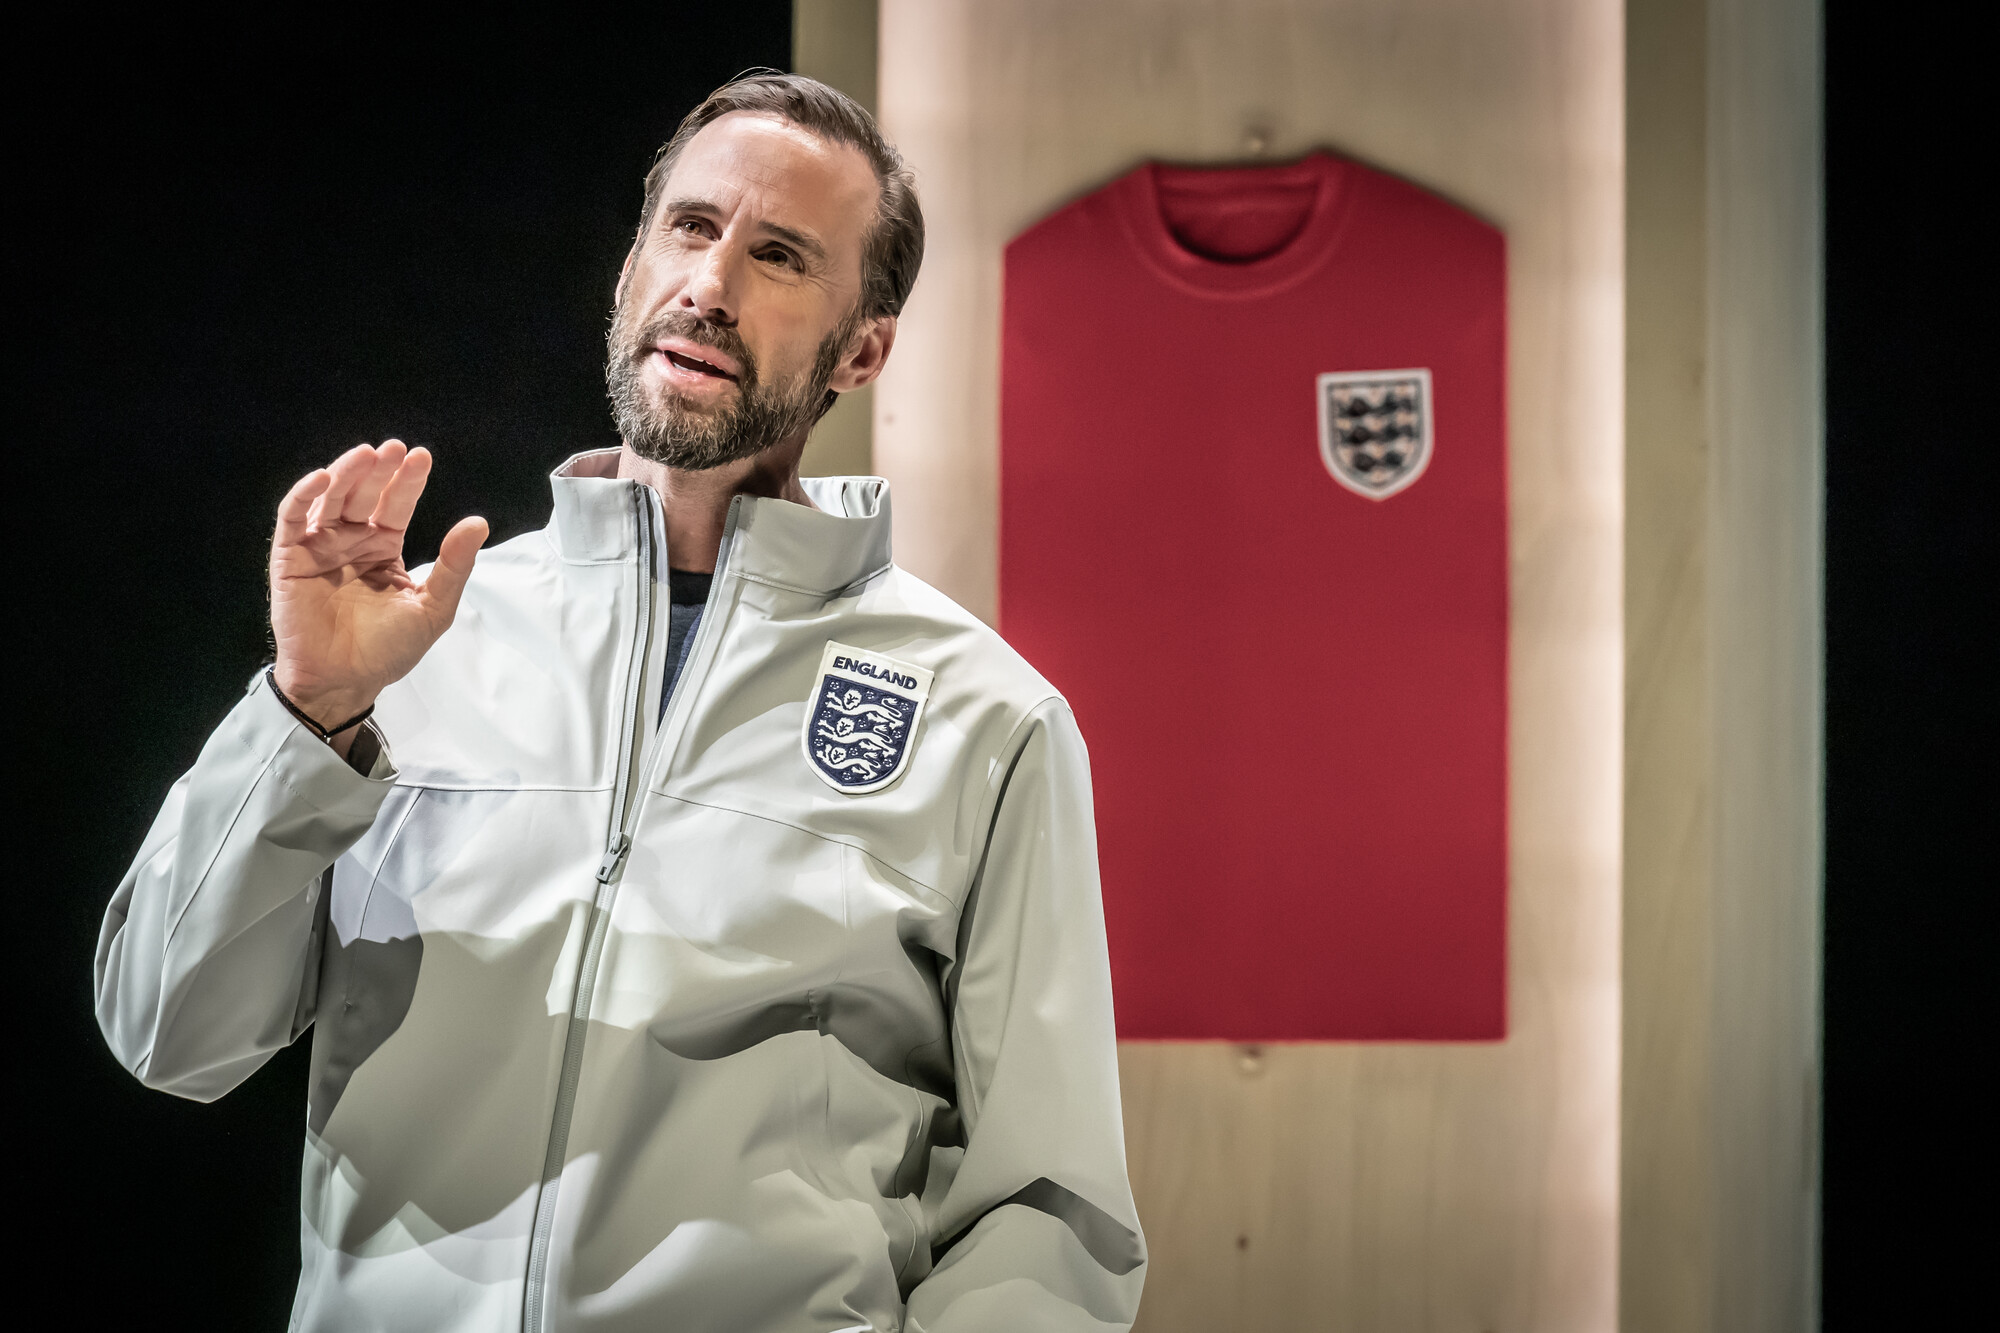 A man in an England football jacket speaks on stage.